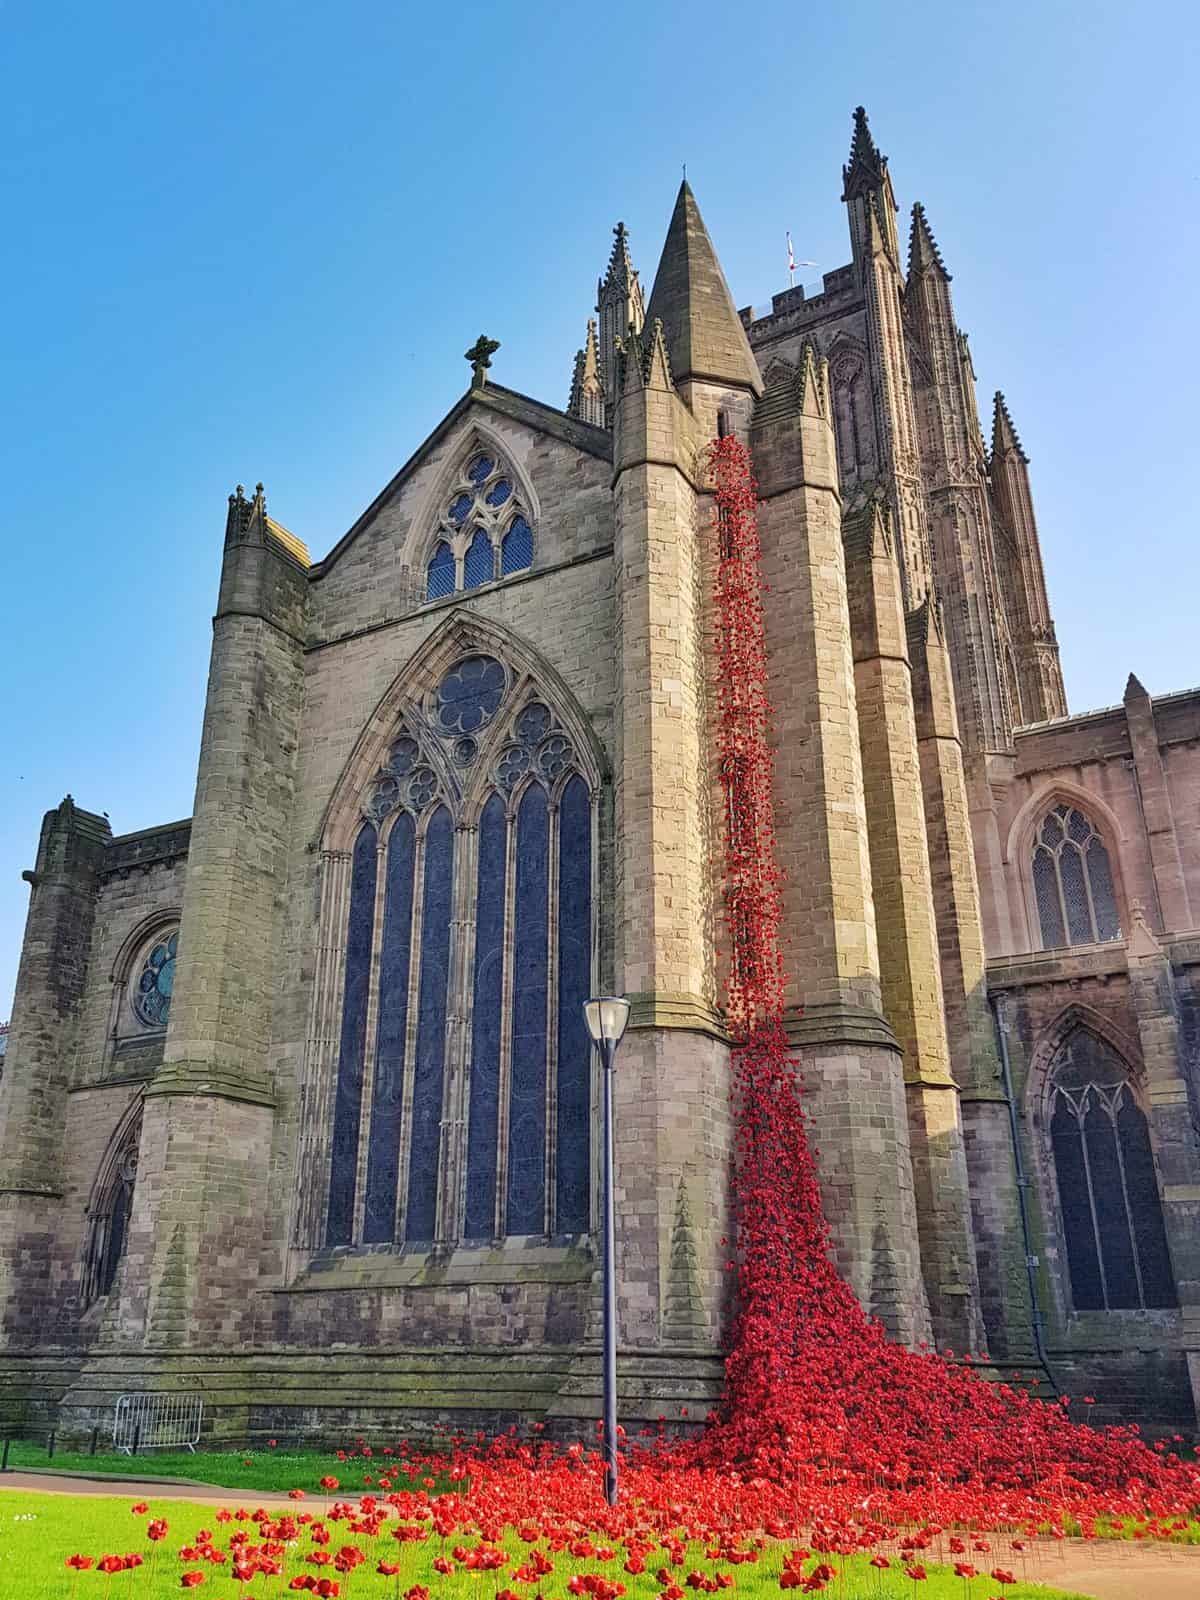 Poppies at Hereford cathedral